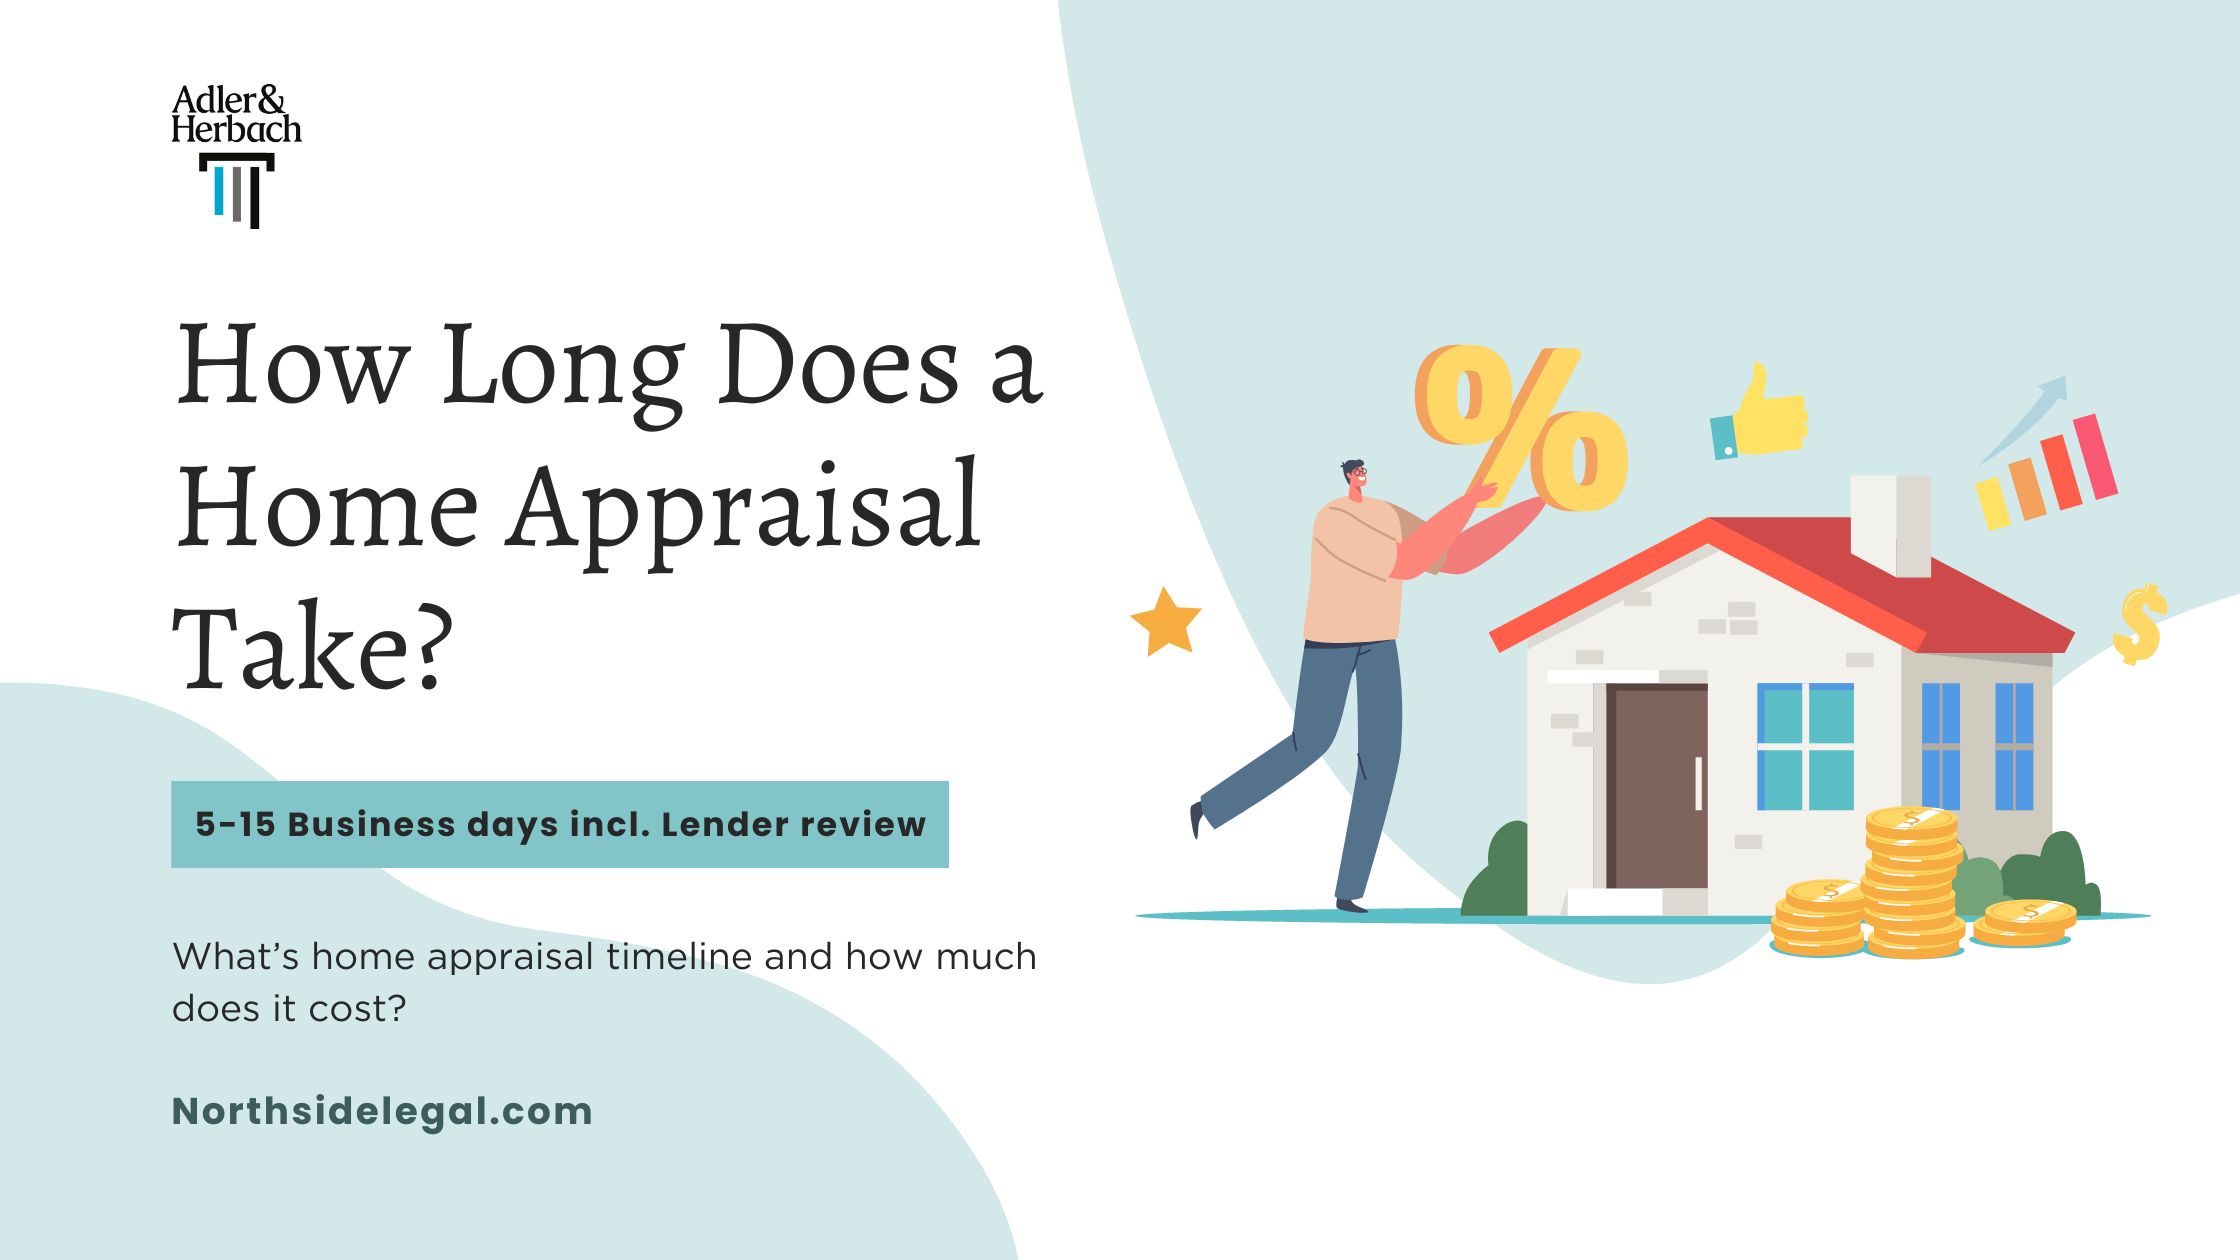 How Long Does a Home Appraisal Take?